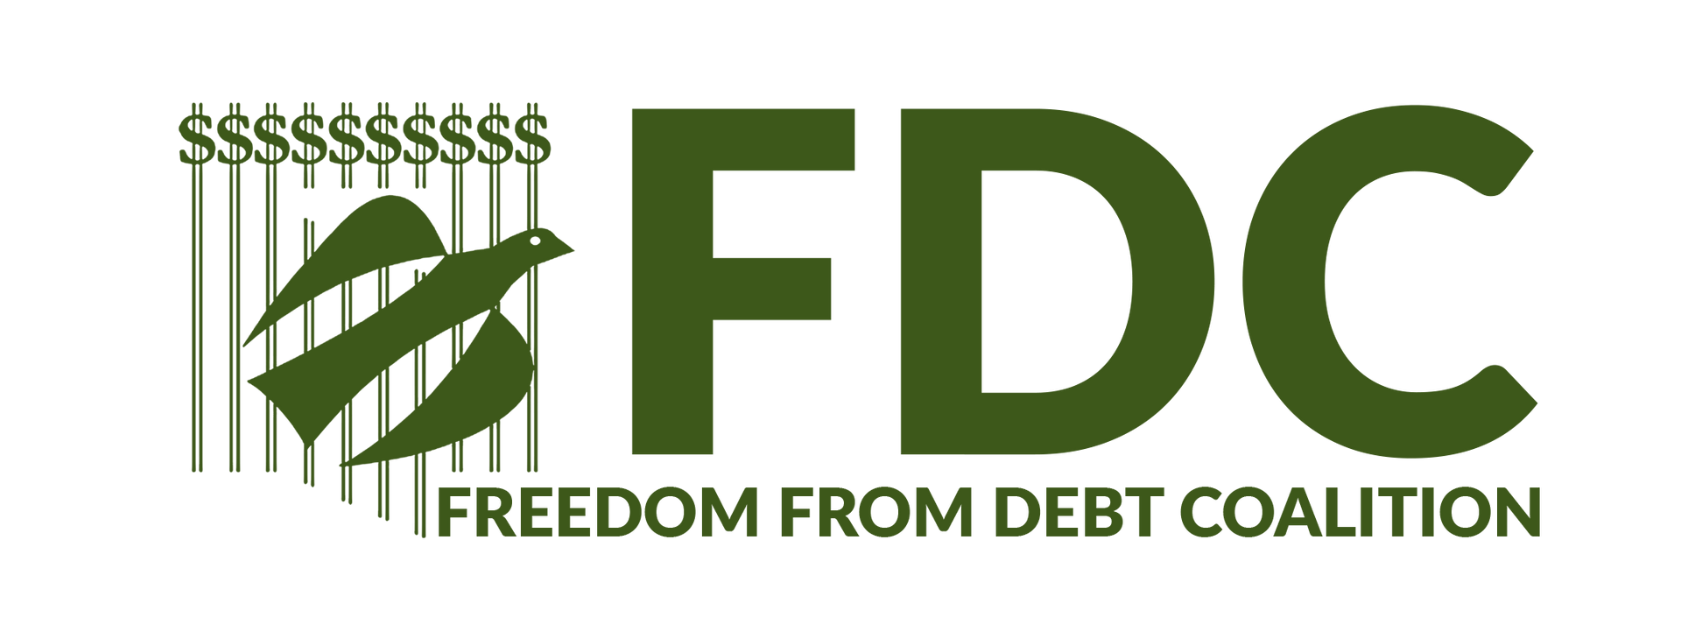 Freedom from Debt Coalition